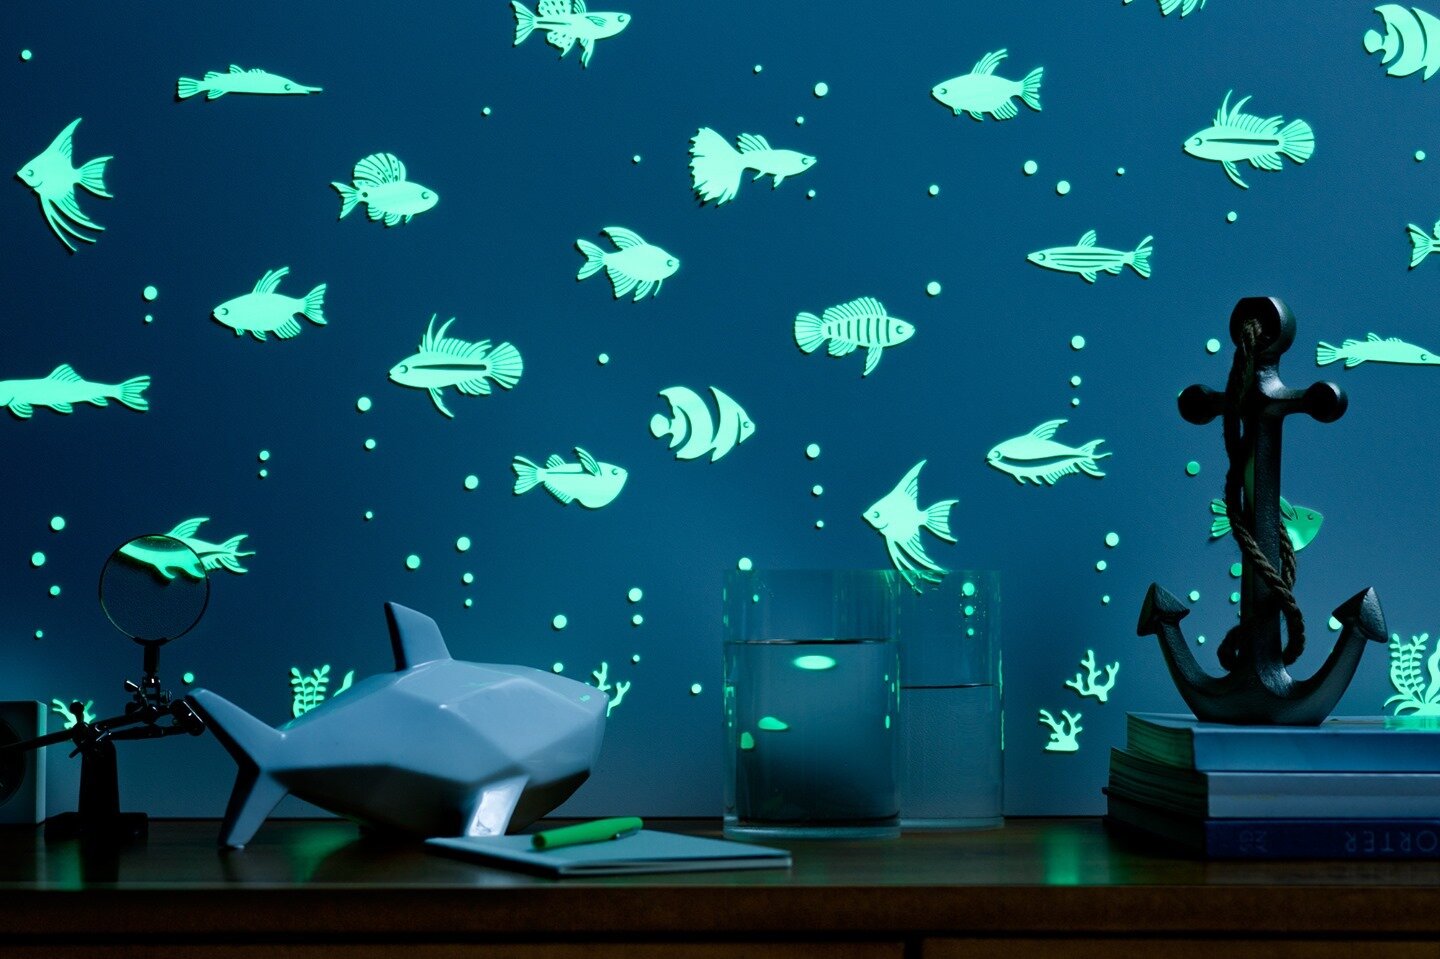 Does your kids' room have a special theme?⁠
We just love this under the sea idea.⁠
.⁠
.⁠
.⁠
#kidsroom #walldecals #wallstickers #glowingstickers #walldecoration #undertheseatheme #seastickers #fishstickers #kidsroomdecoration #glowinthedark⁠
⁠
⁠